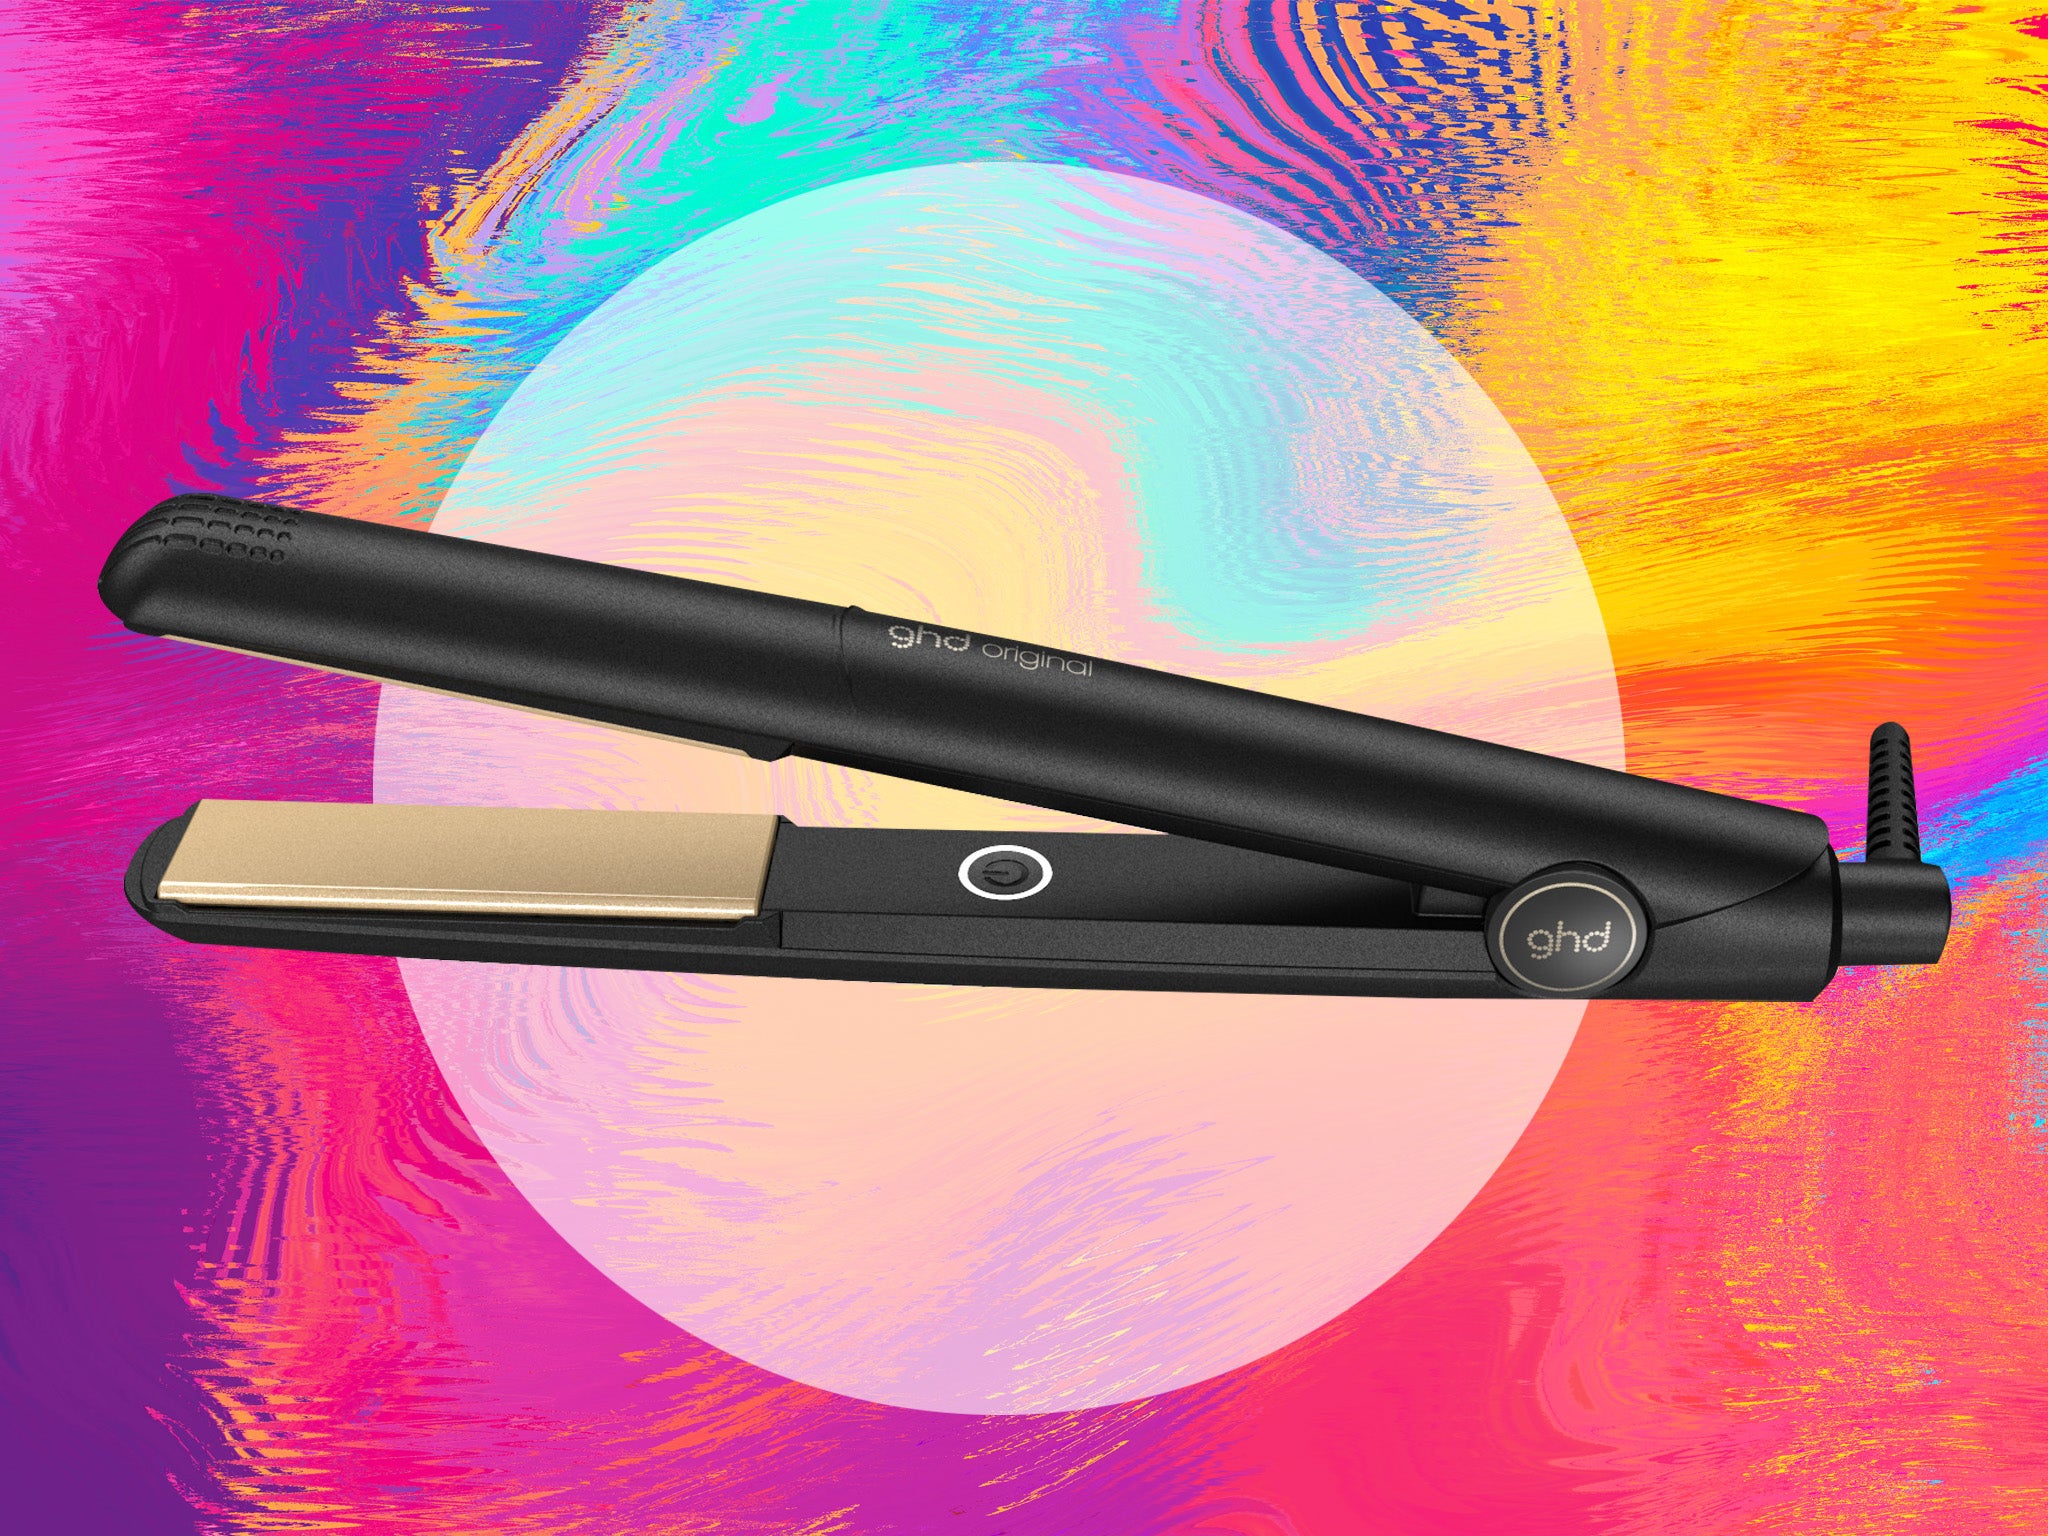 The straightener has been given a 21 st century upgrade, with improved technology and a more contemporary look